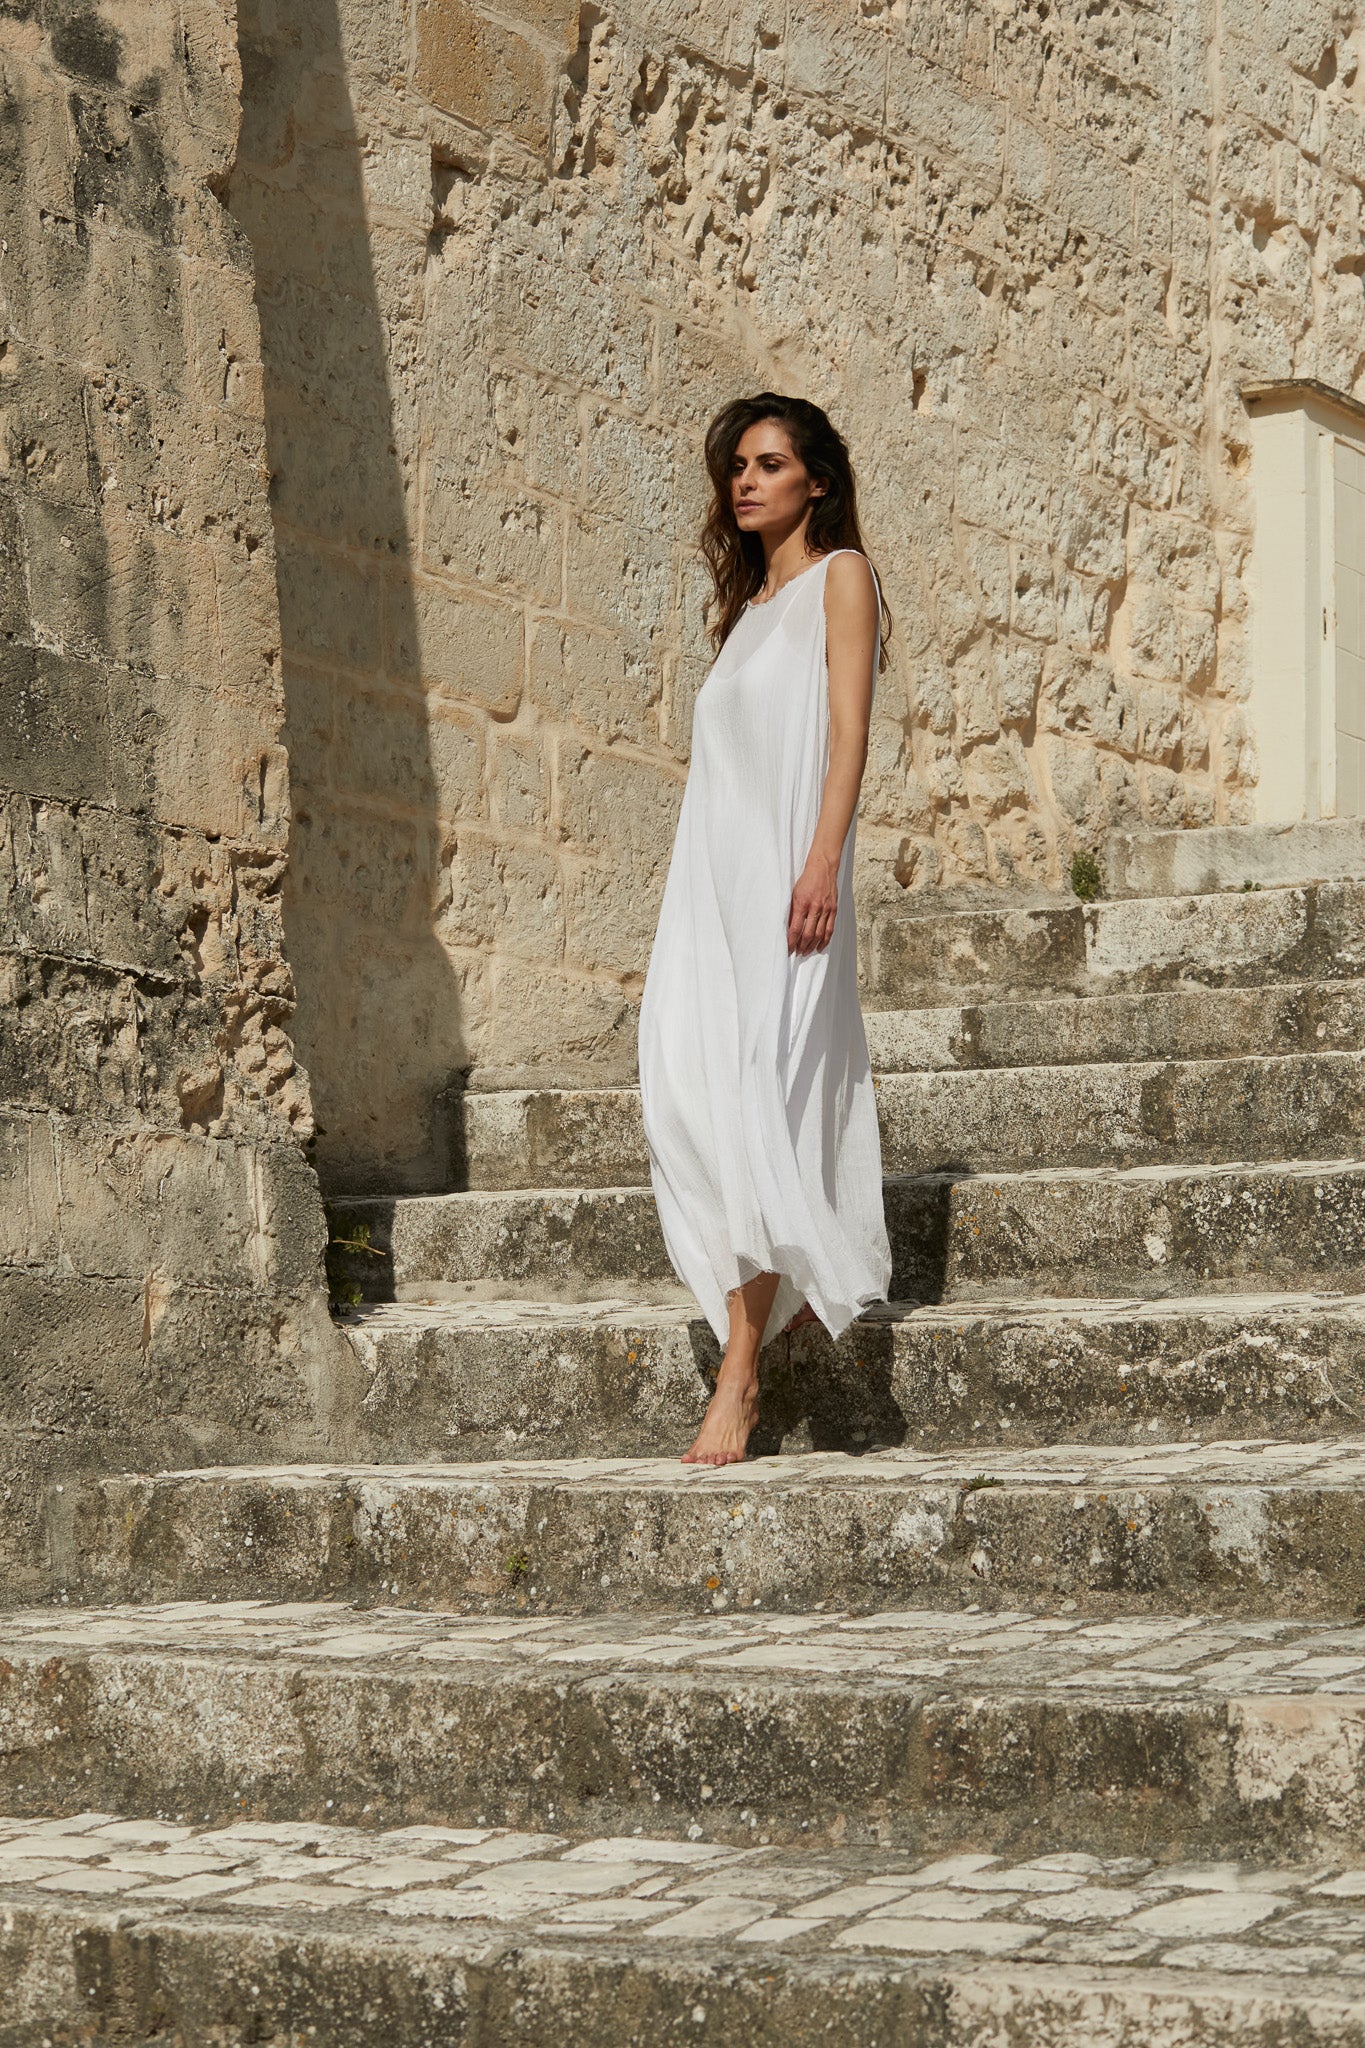 A MegbyDesign model is wearing a white gauze cotton angelica dress which is made from a beautifully lightweight gauze cotton. The model is bare foot and walking down a set of cobblestone steps